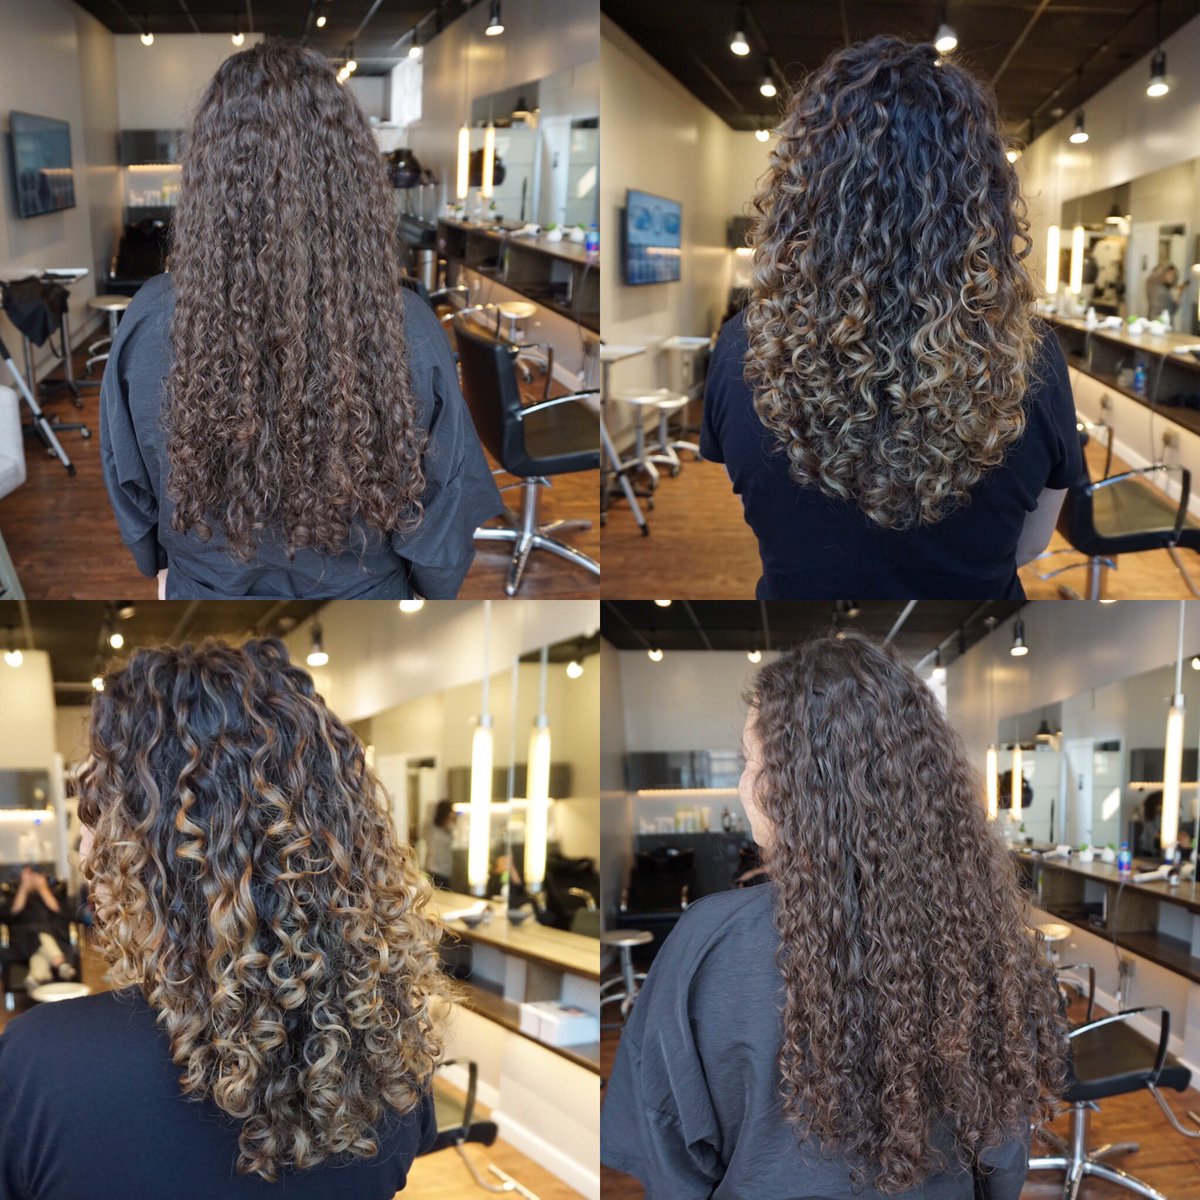 Evan Joseph Salon On Twitter Check Out This Amazing Curly Before